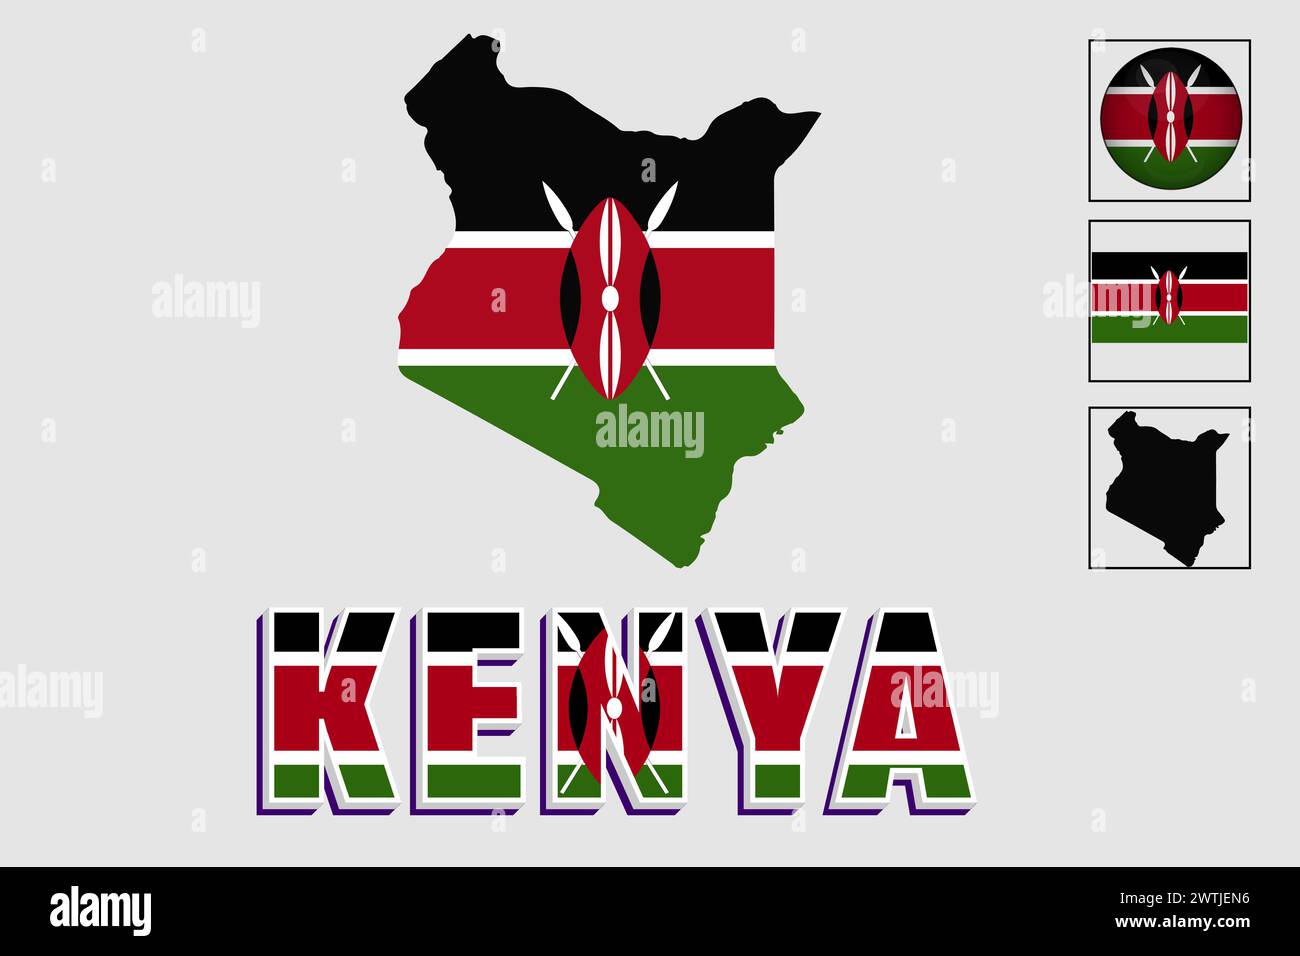 Kenya flag and map in a vector graphic Stock Vector